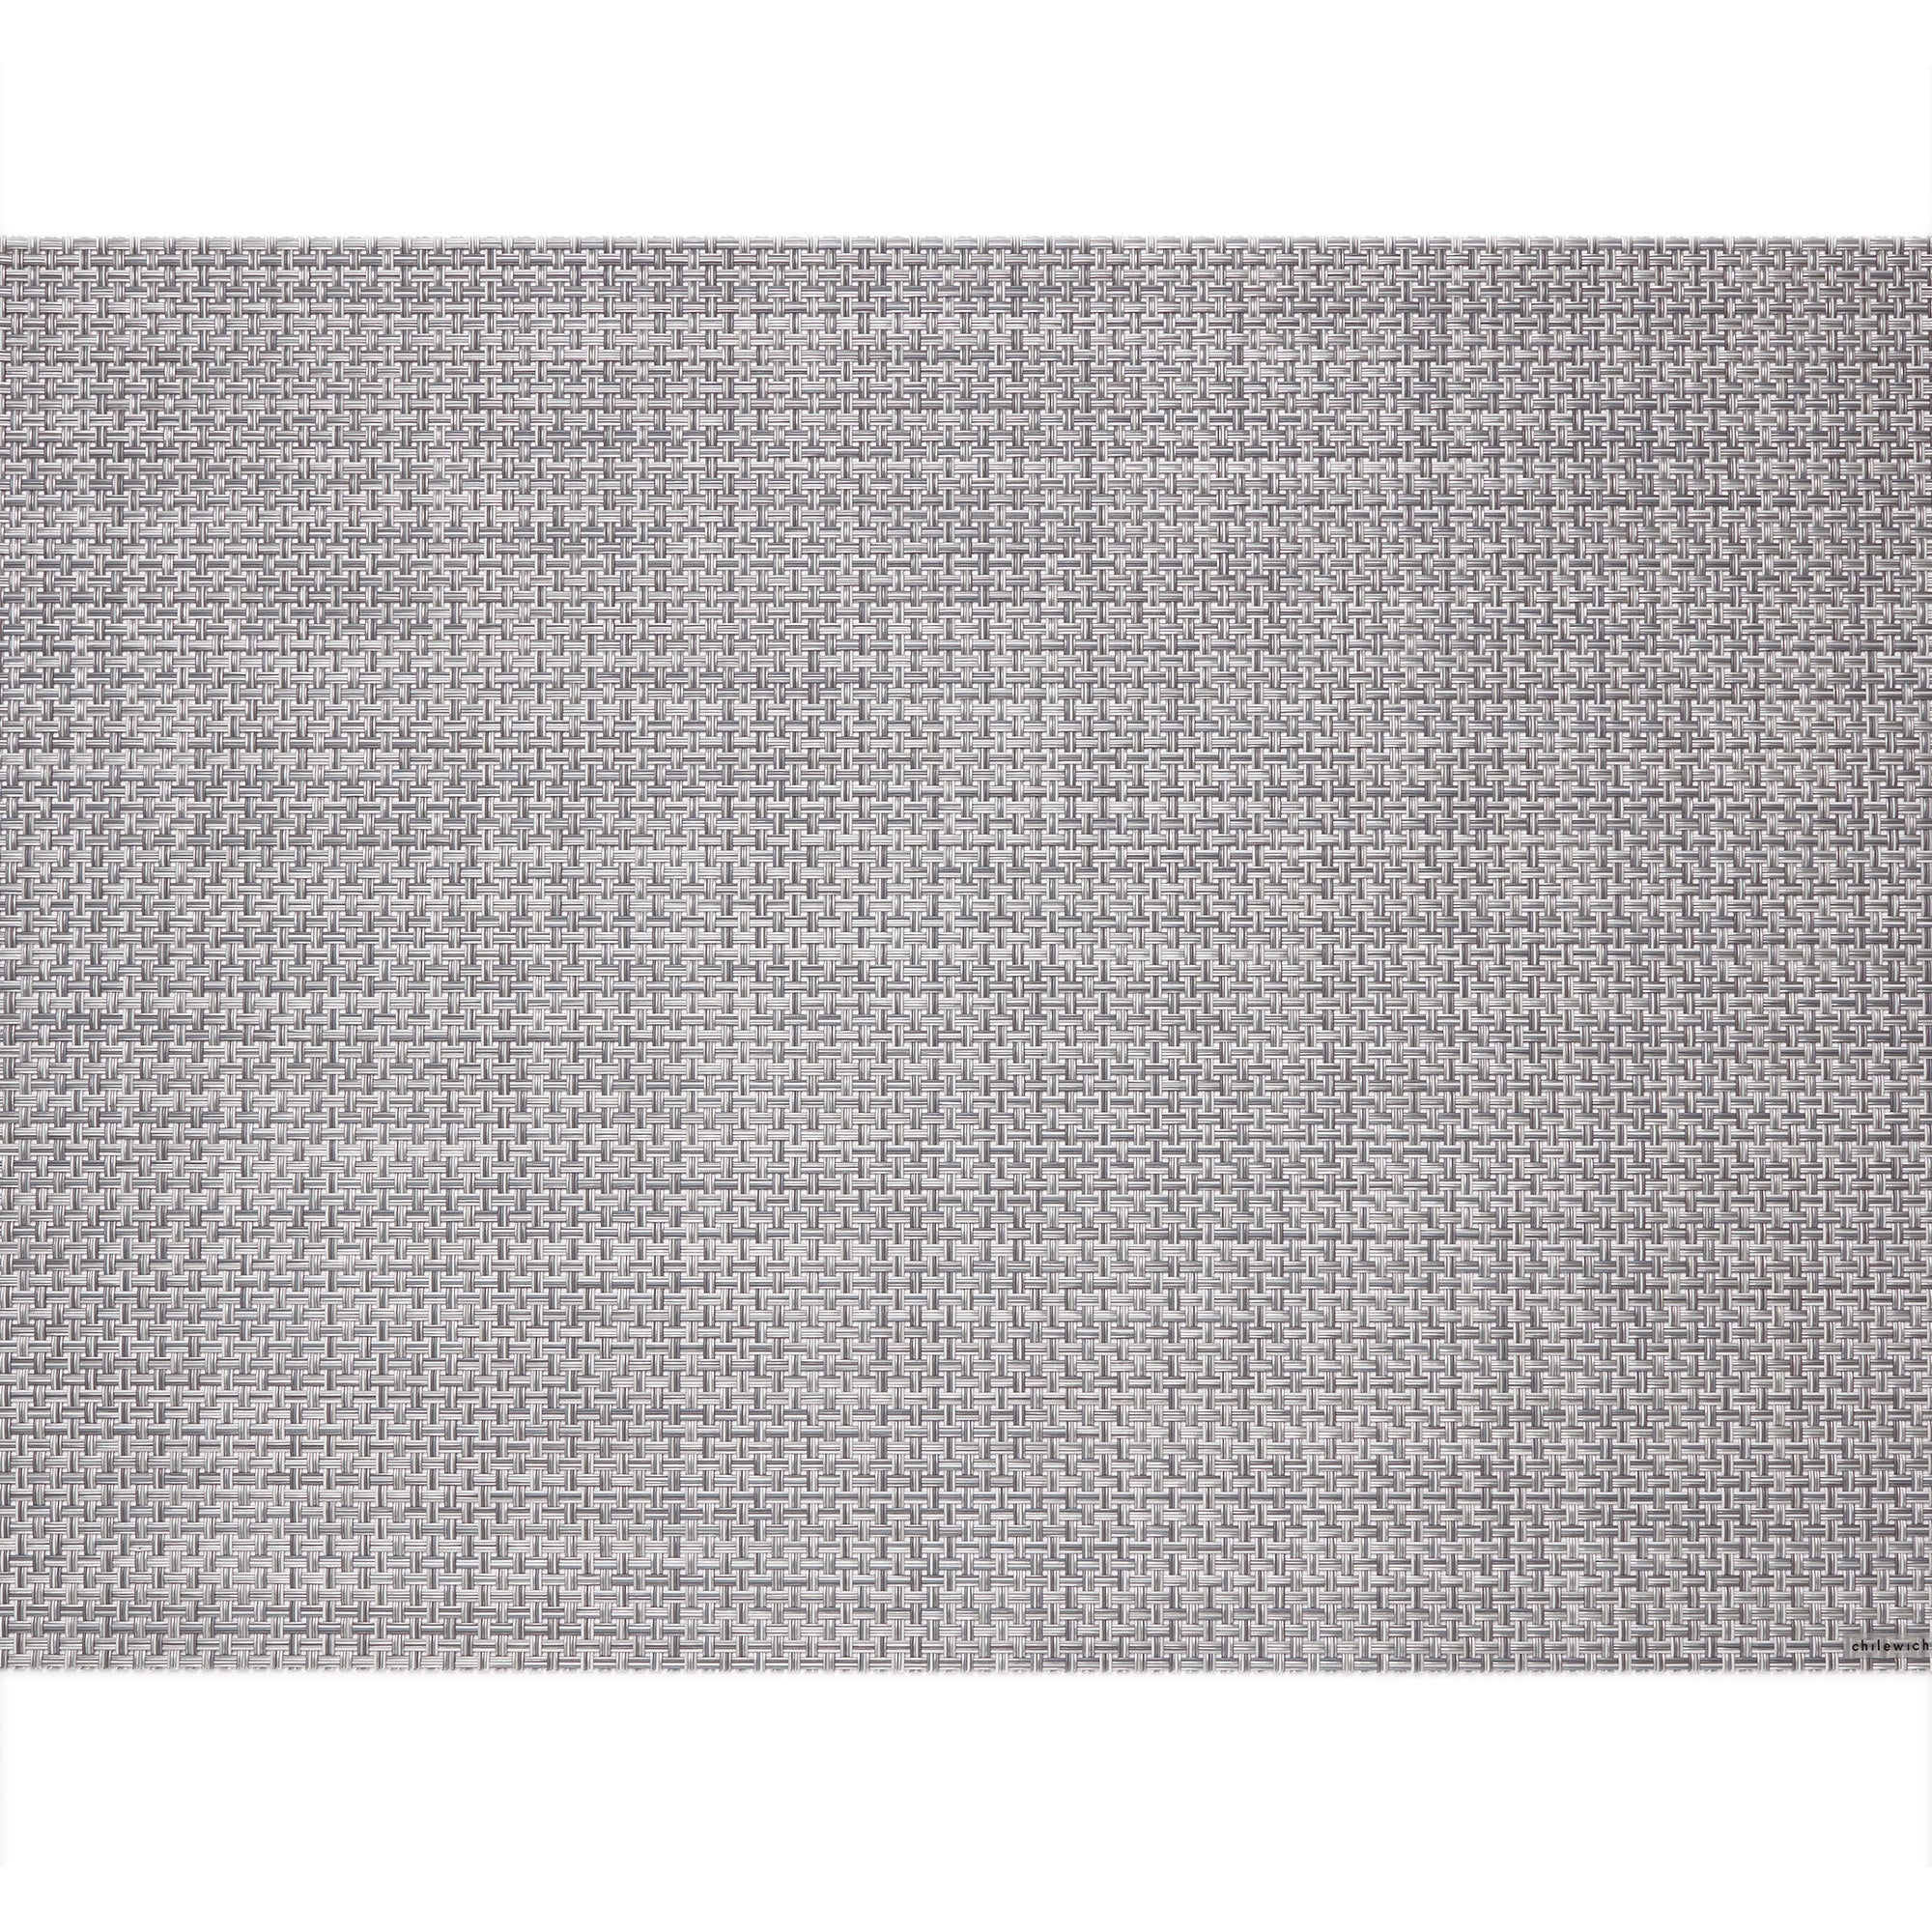 Chilewich Placemat - Basketweave - Shadow